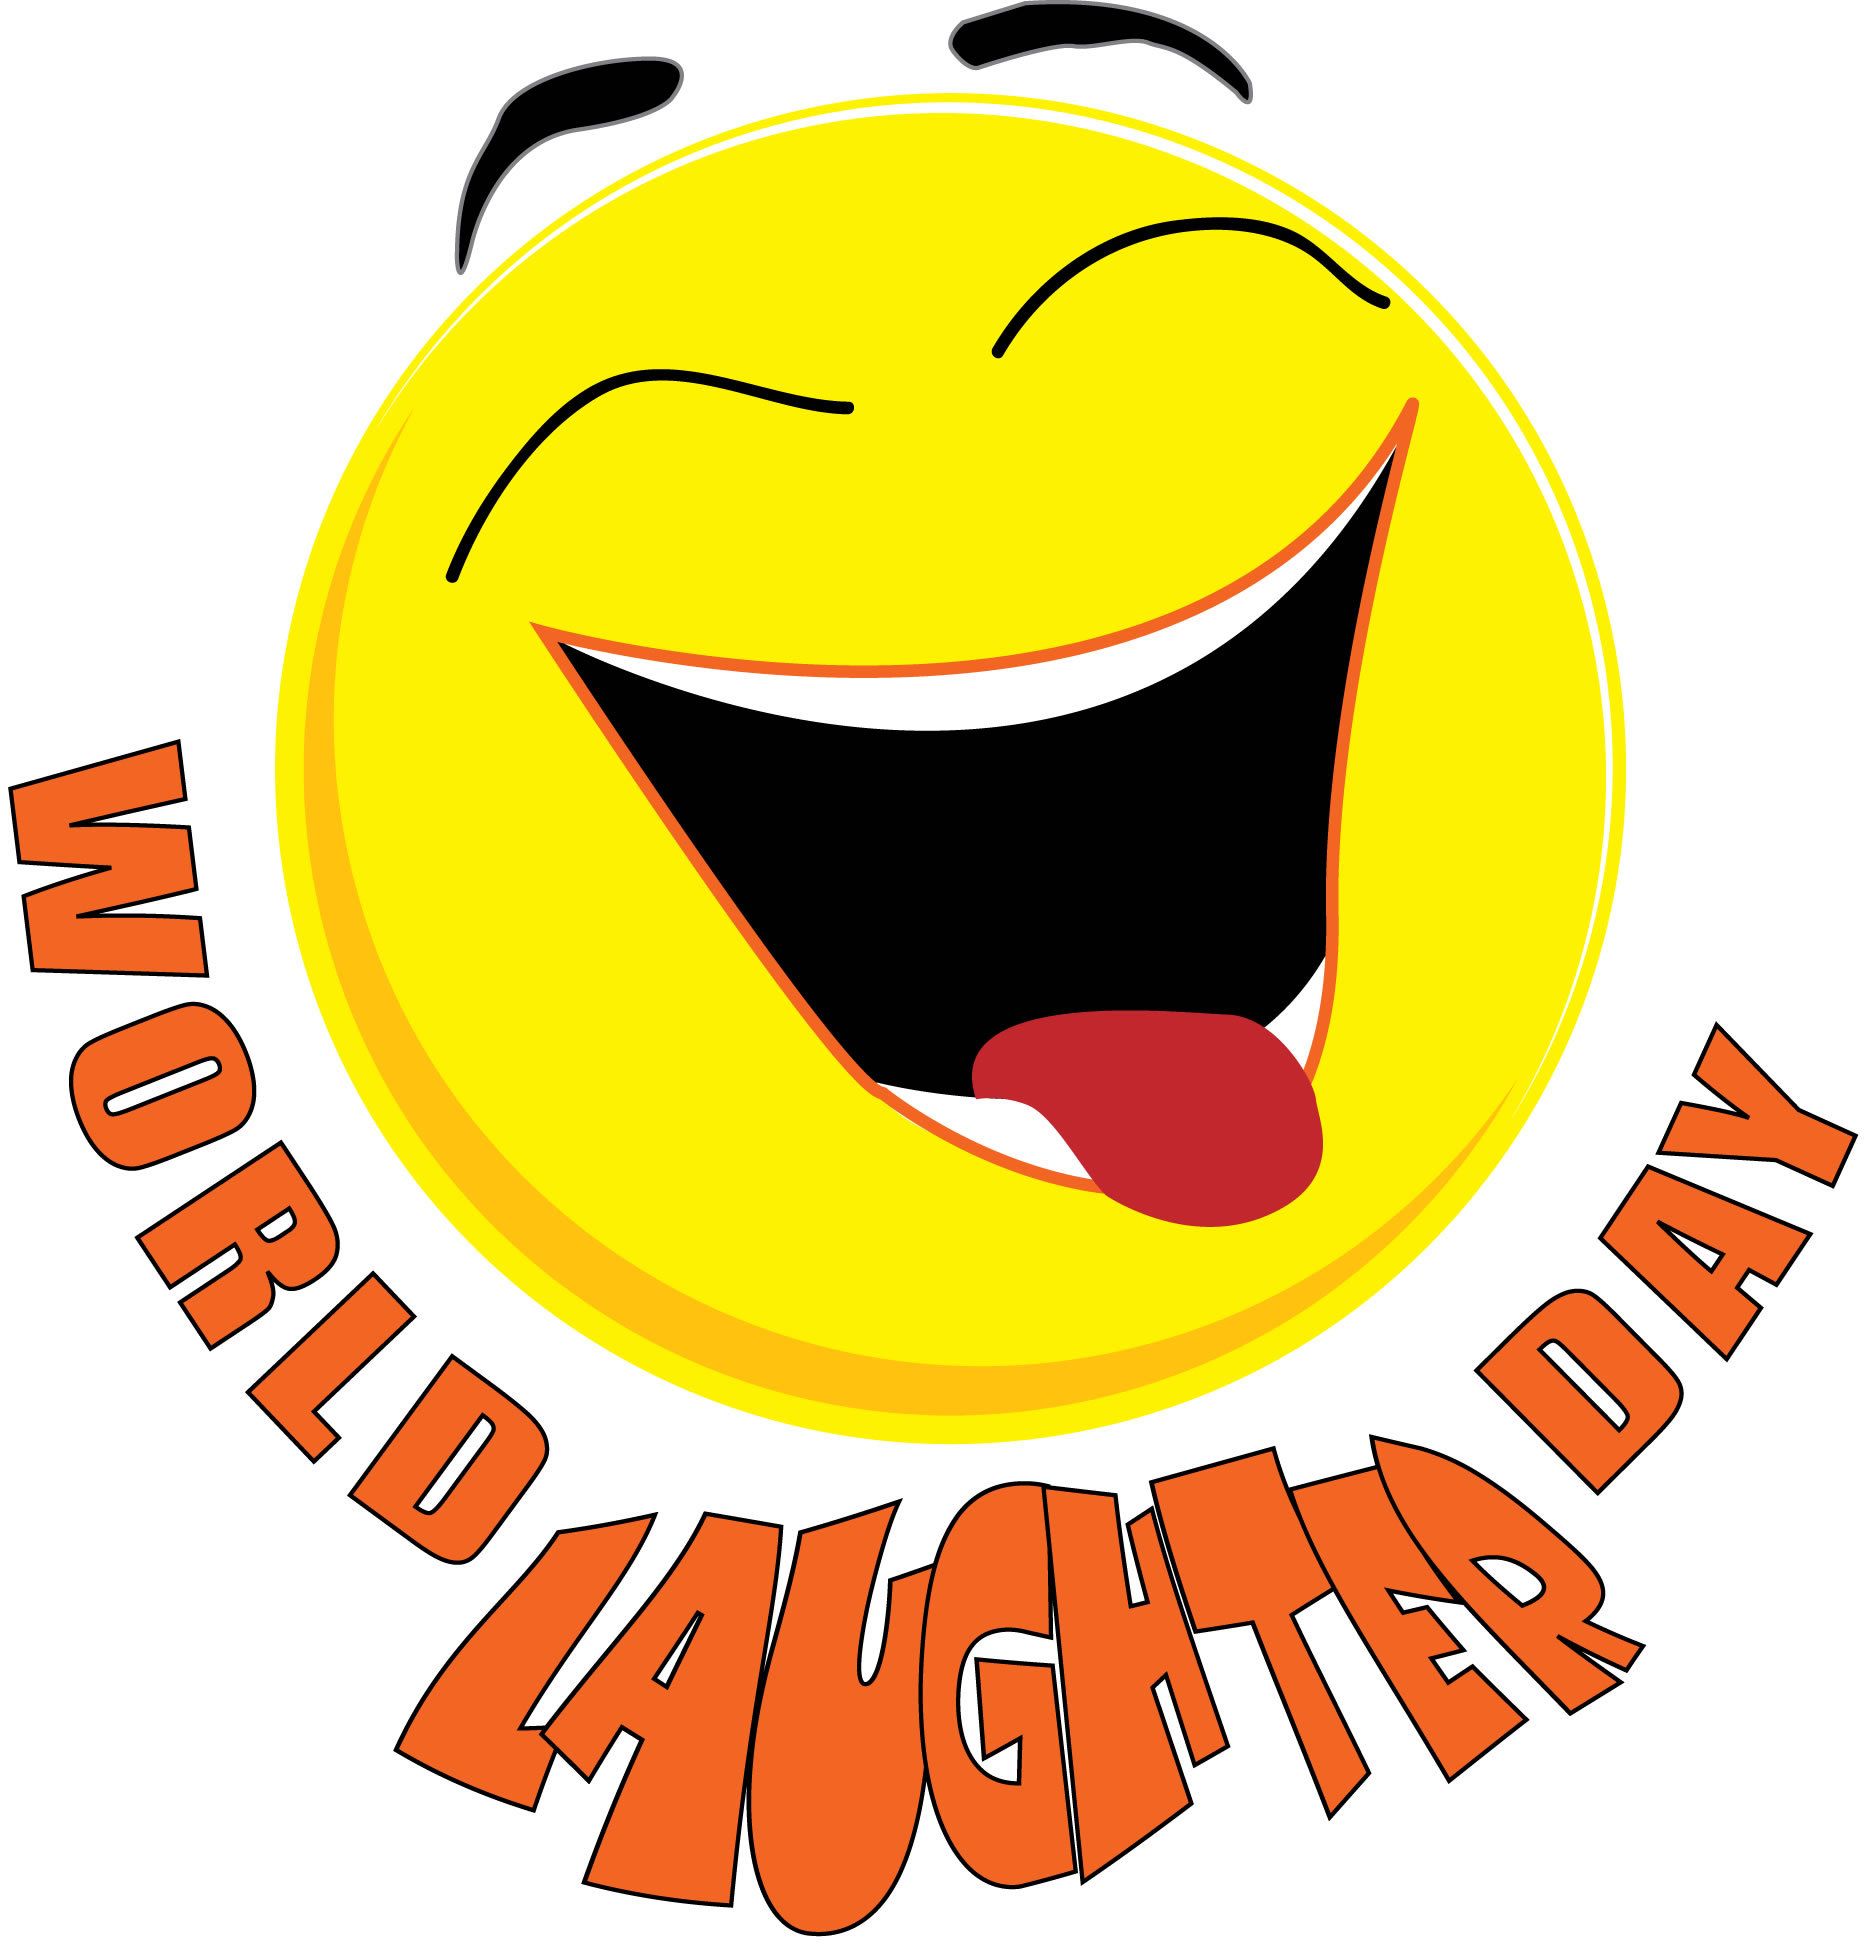 Free Image Of Laughter, Download Free Clip Art, Free Clip Art